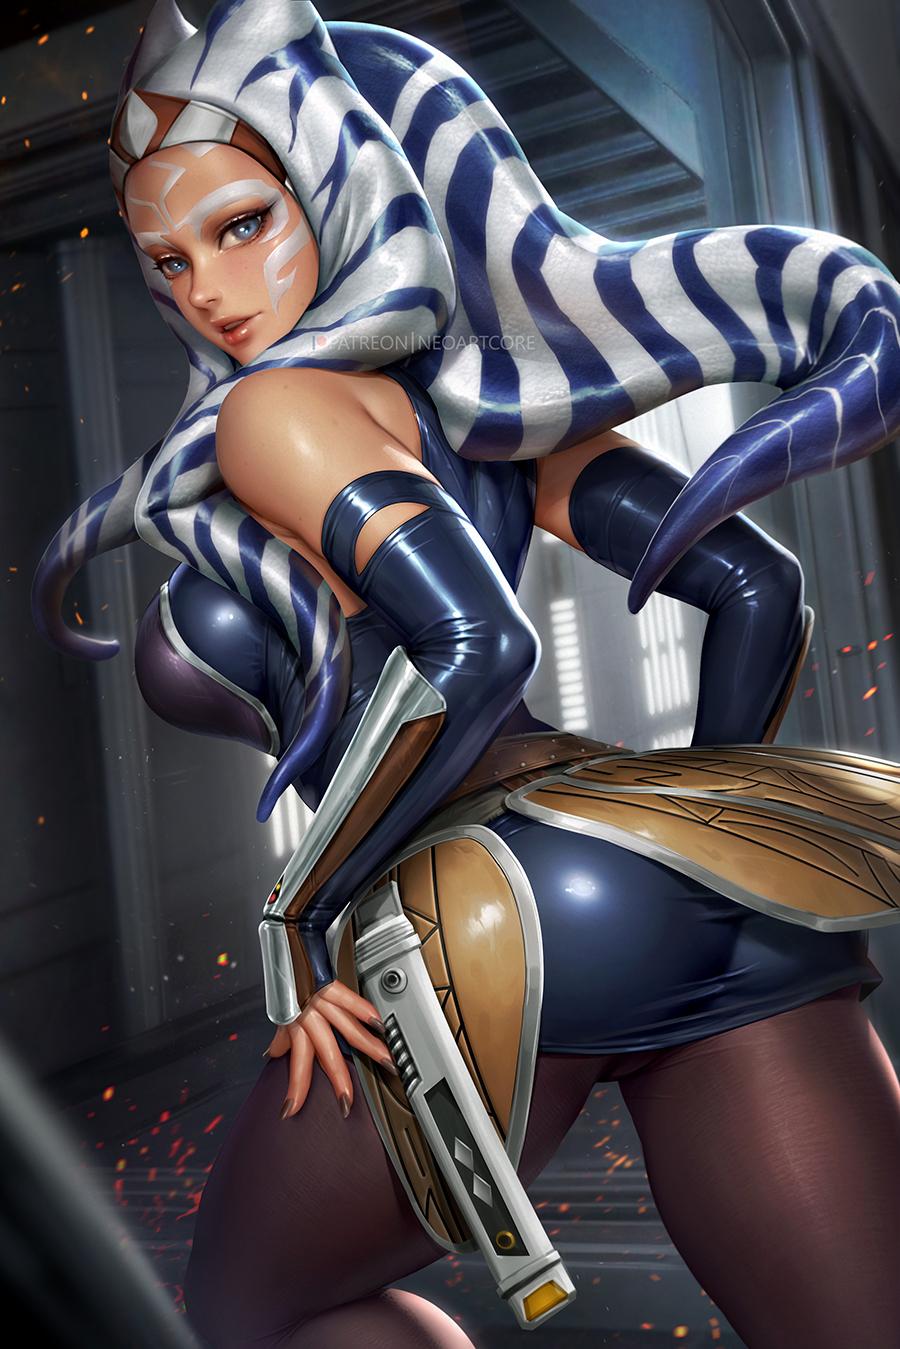 NeoArtCorE on X: Ahsoka Tano - Clone Wars More detail  >>t.cor77o8Y7uQ7 My patrons will get: ♥ High-Res without watermark  ♥ PSD ♥ Lingerie ♥ NSFW This piece on June's Rewards. #ahsoka #ahsokatano #